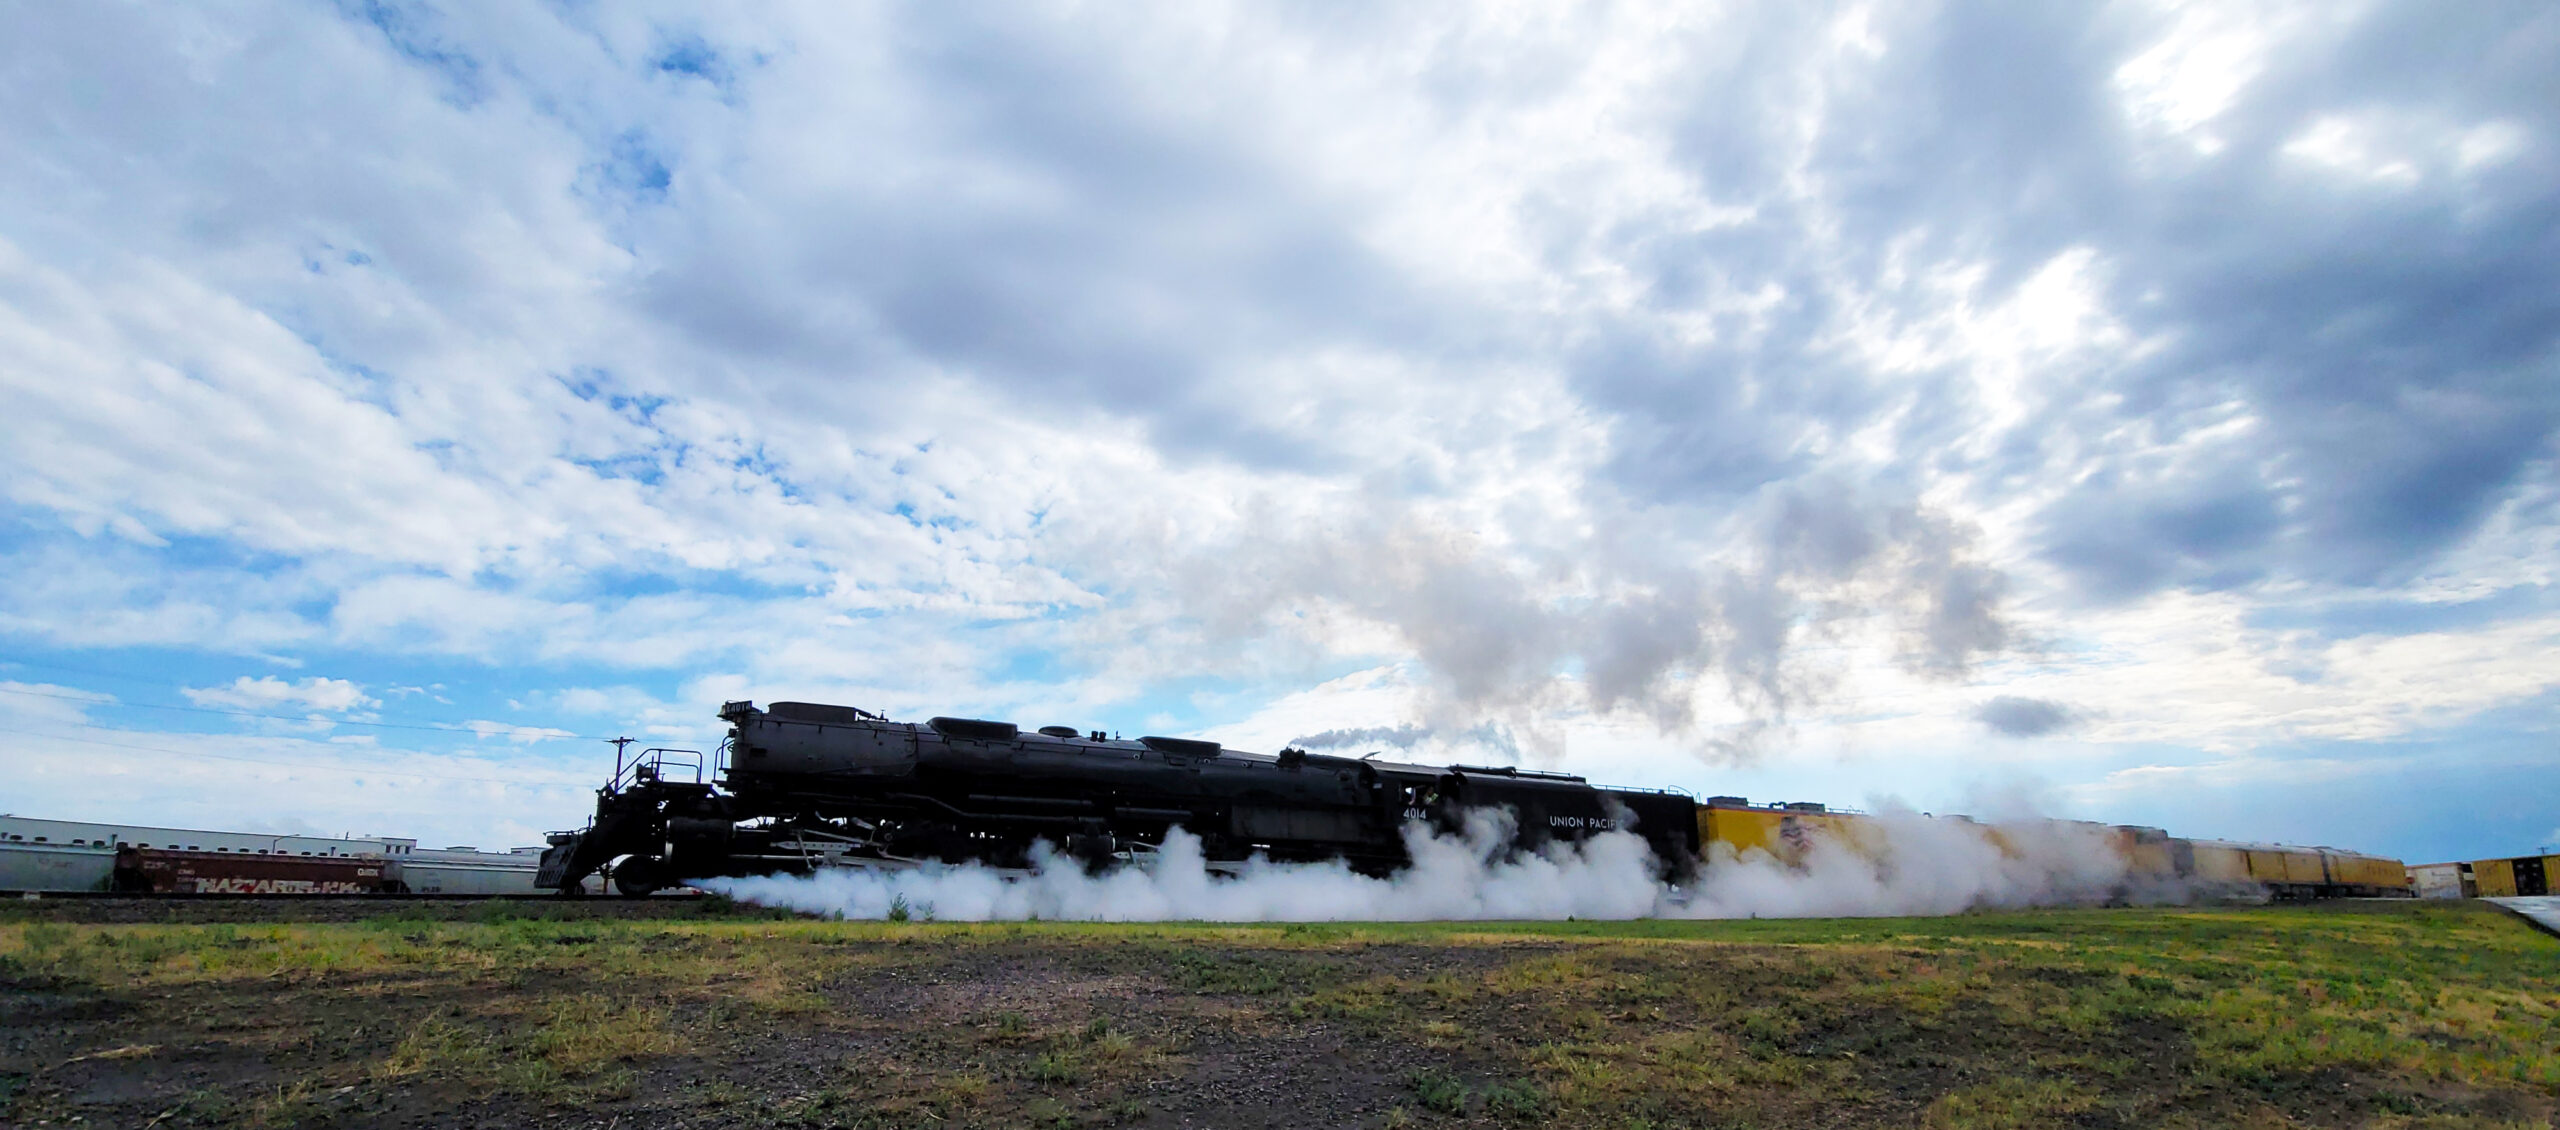 Steam shooting from a large black articulated steam locomotive as it pulls its train.